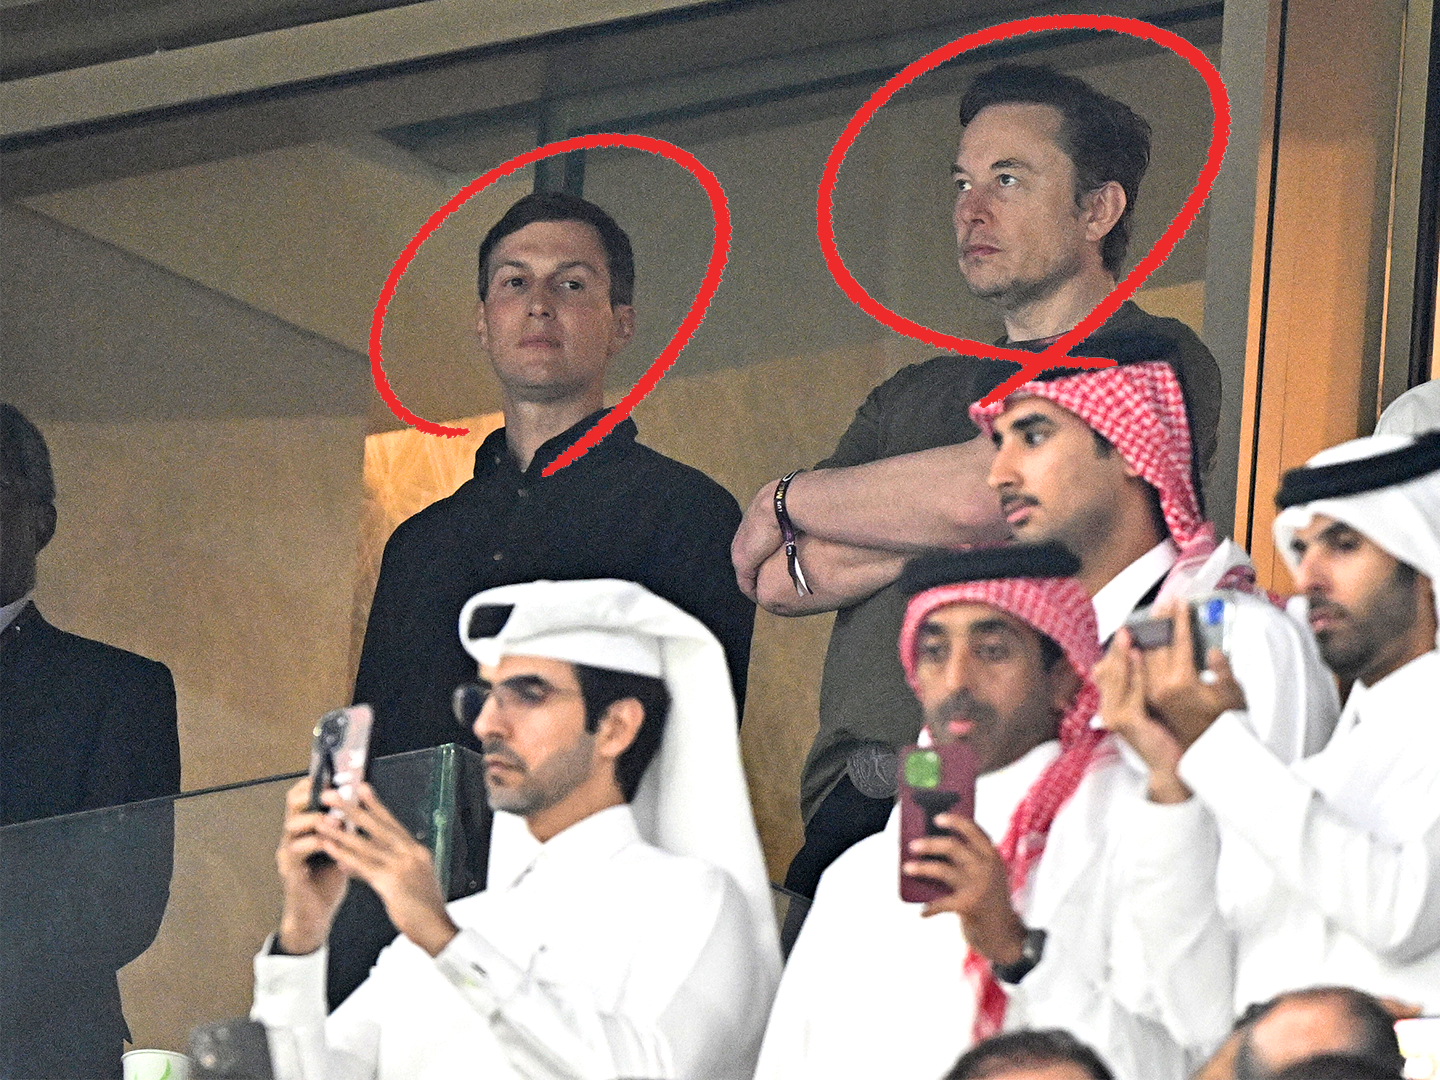 Elon Musk and Jared Kushner watching the World Cup final